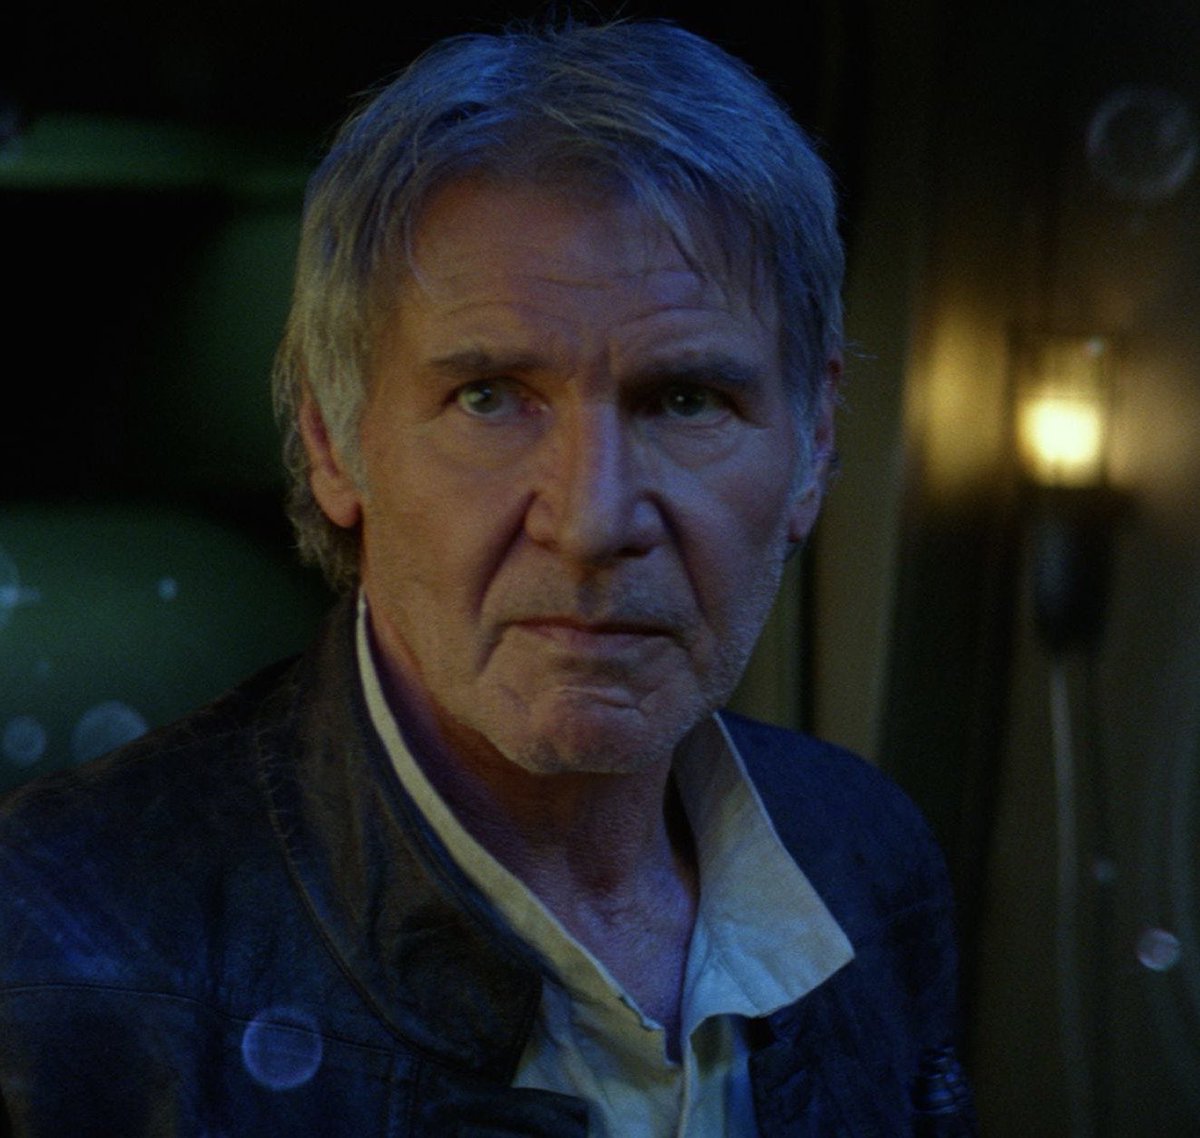 Every single thing about Han in The Force Awakens is amplified and made better because of Han in Solo. 100%. The connective tissue is right there when old Han says he “used to be” Han Solo. A name thrust upon him that he claimed and molded into the guy he wanted to be.